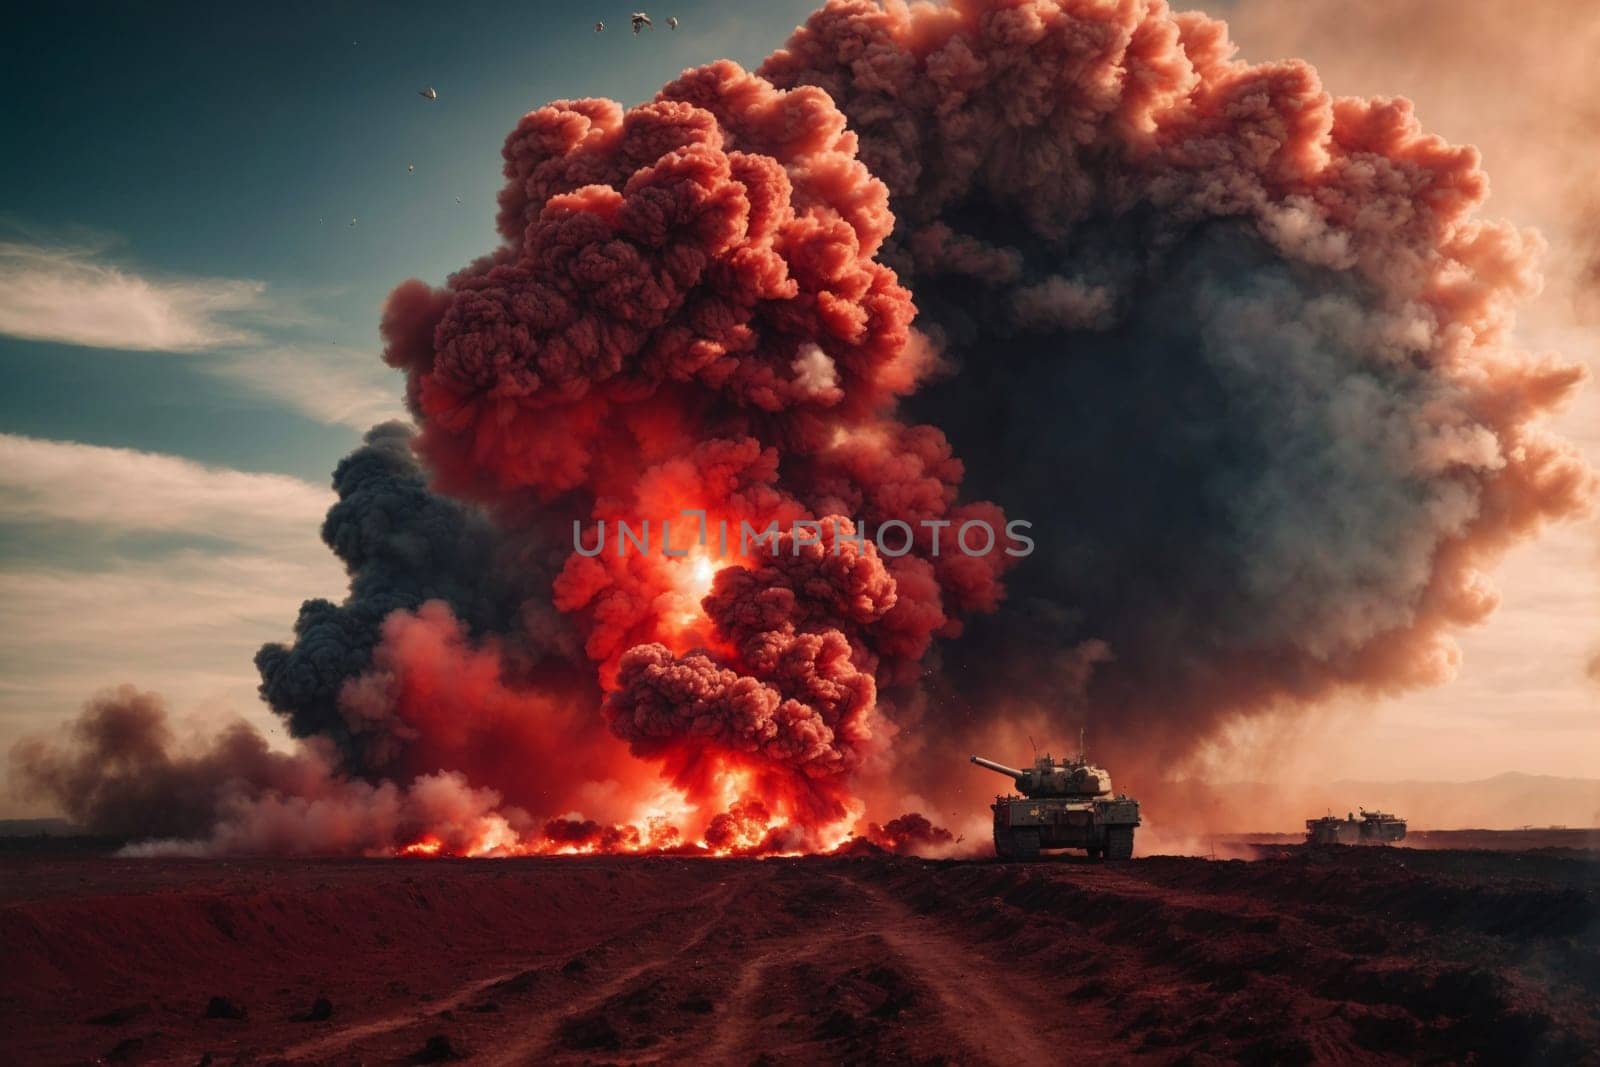 A tank emits a large cloud of smoke and steam into the air, creating a dramatic and intense visual spectacle.